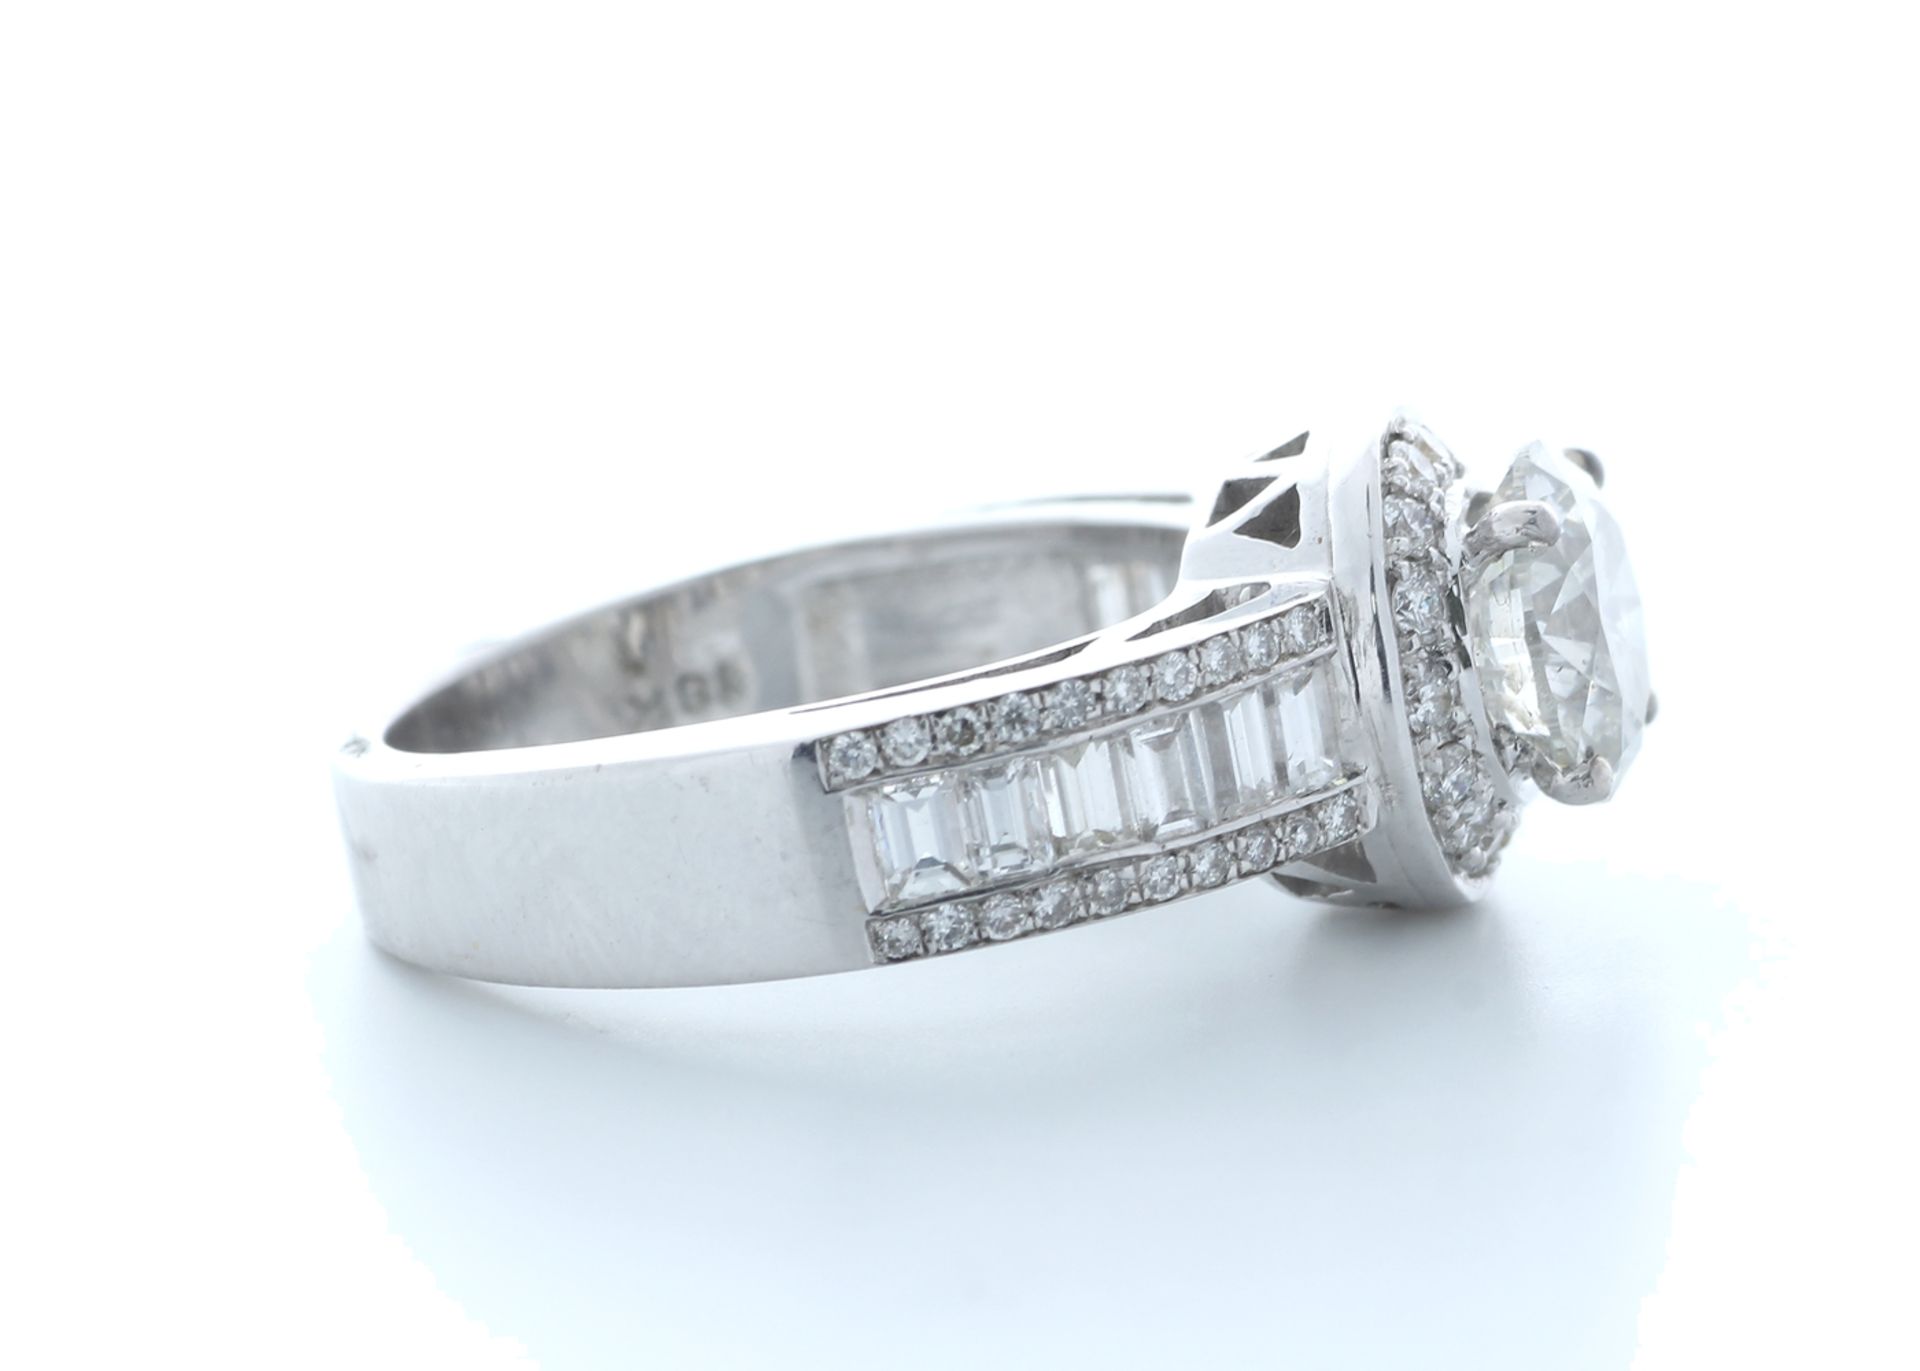 18ct White Gold Single Stone With Halo Setting Ring 2.62 (1.22) Carats - Valued by IDI £26,000. - Image 4 of 5